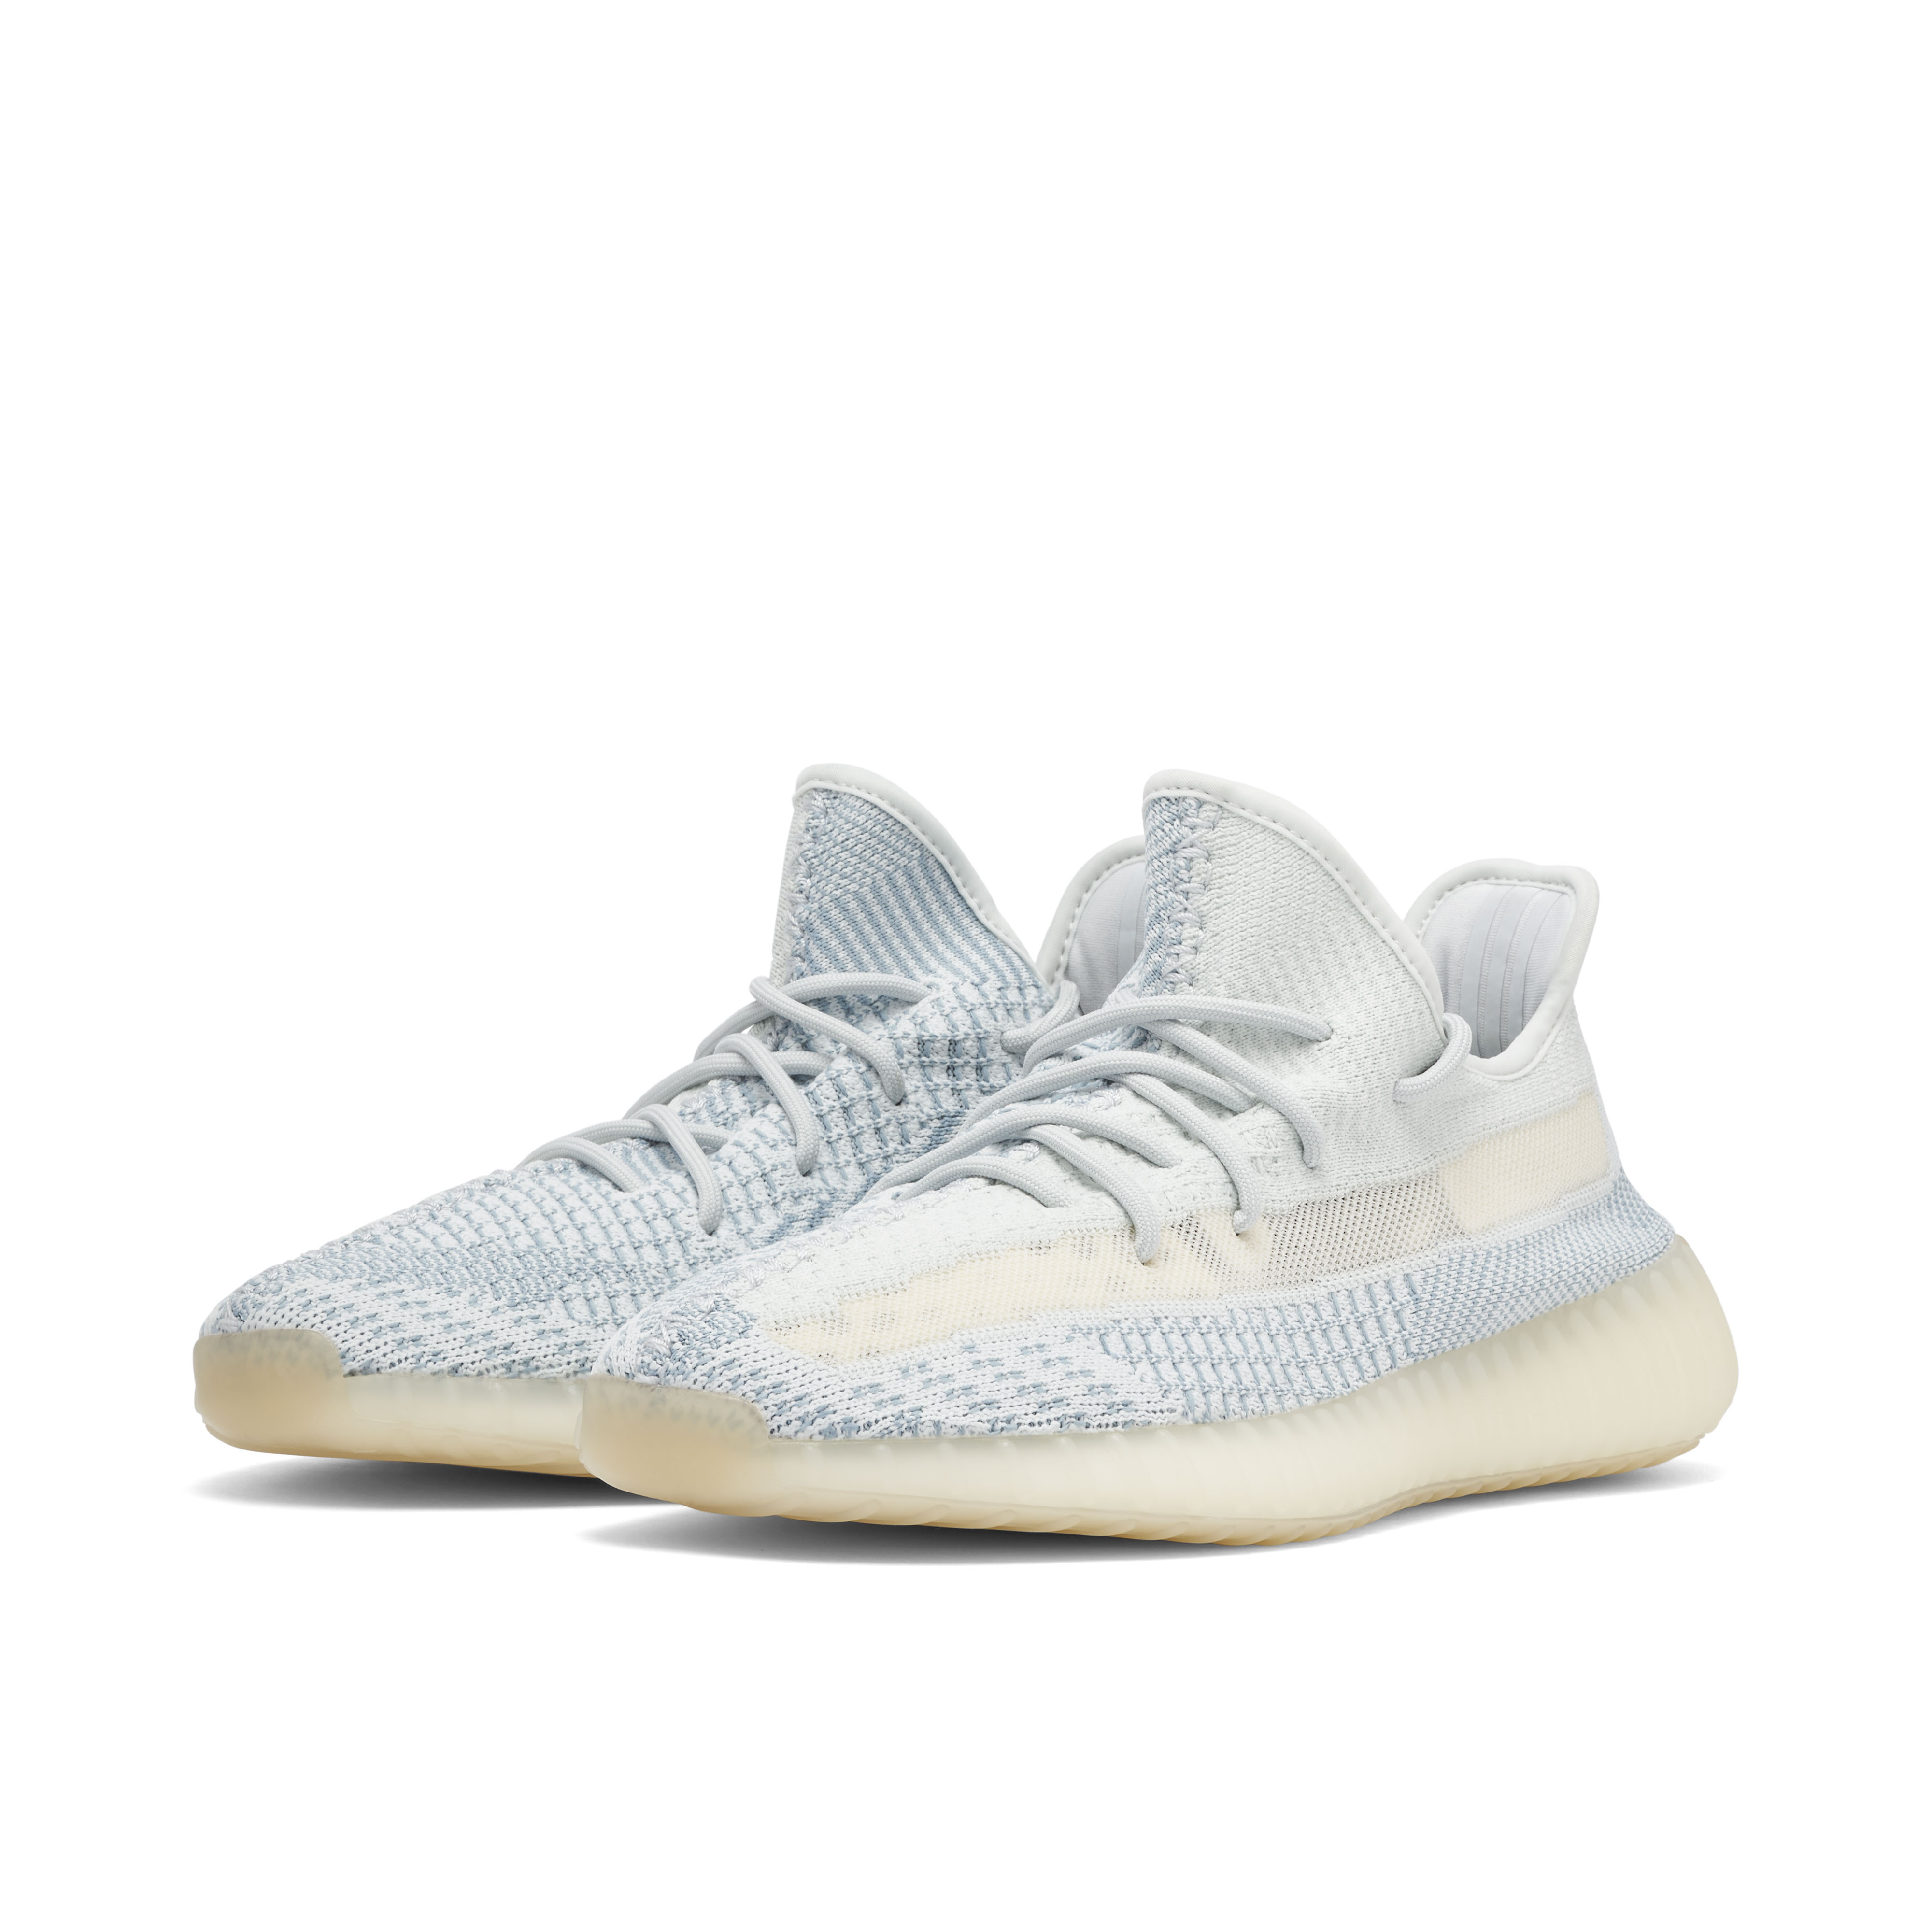 YEEZY BOOST 350 V2 cloud white 23.5